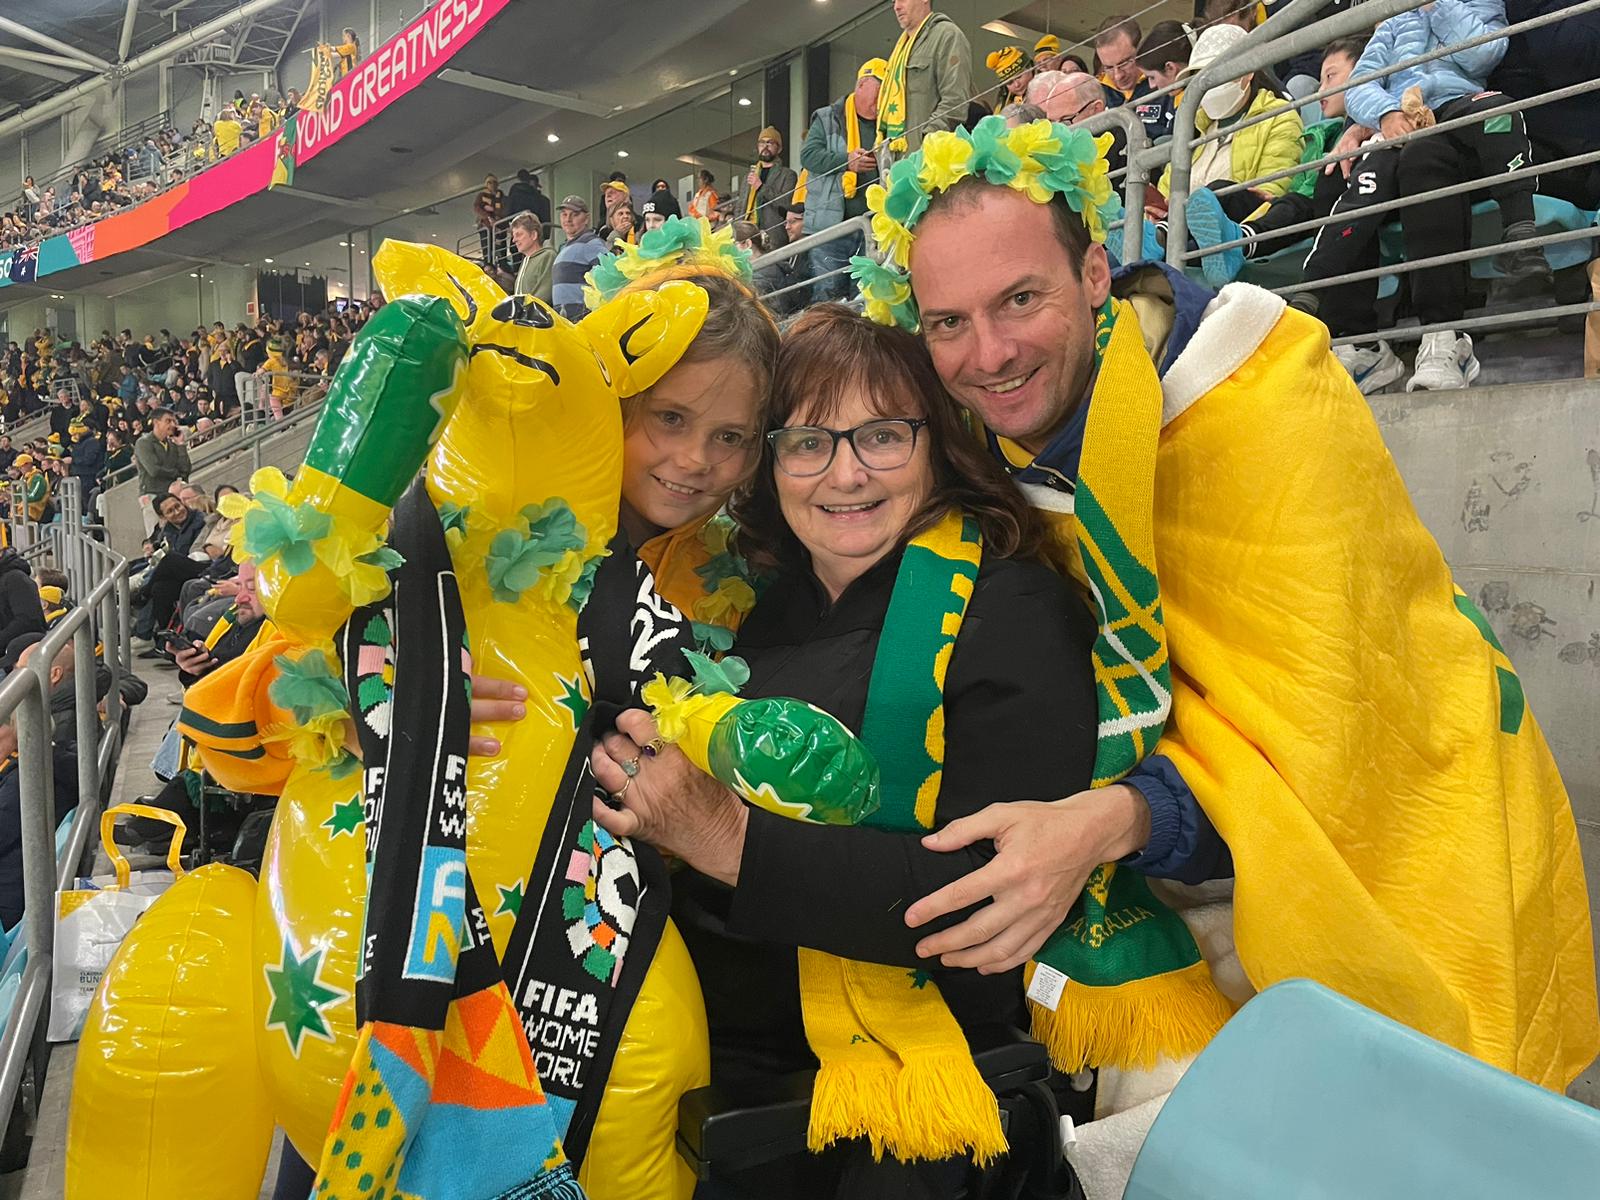 From left to right, Australia fans Maddison, Kerrie and Bradley Beer.